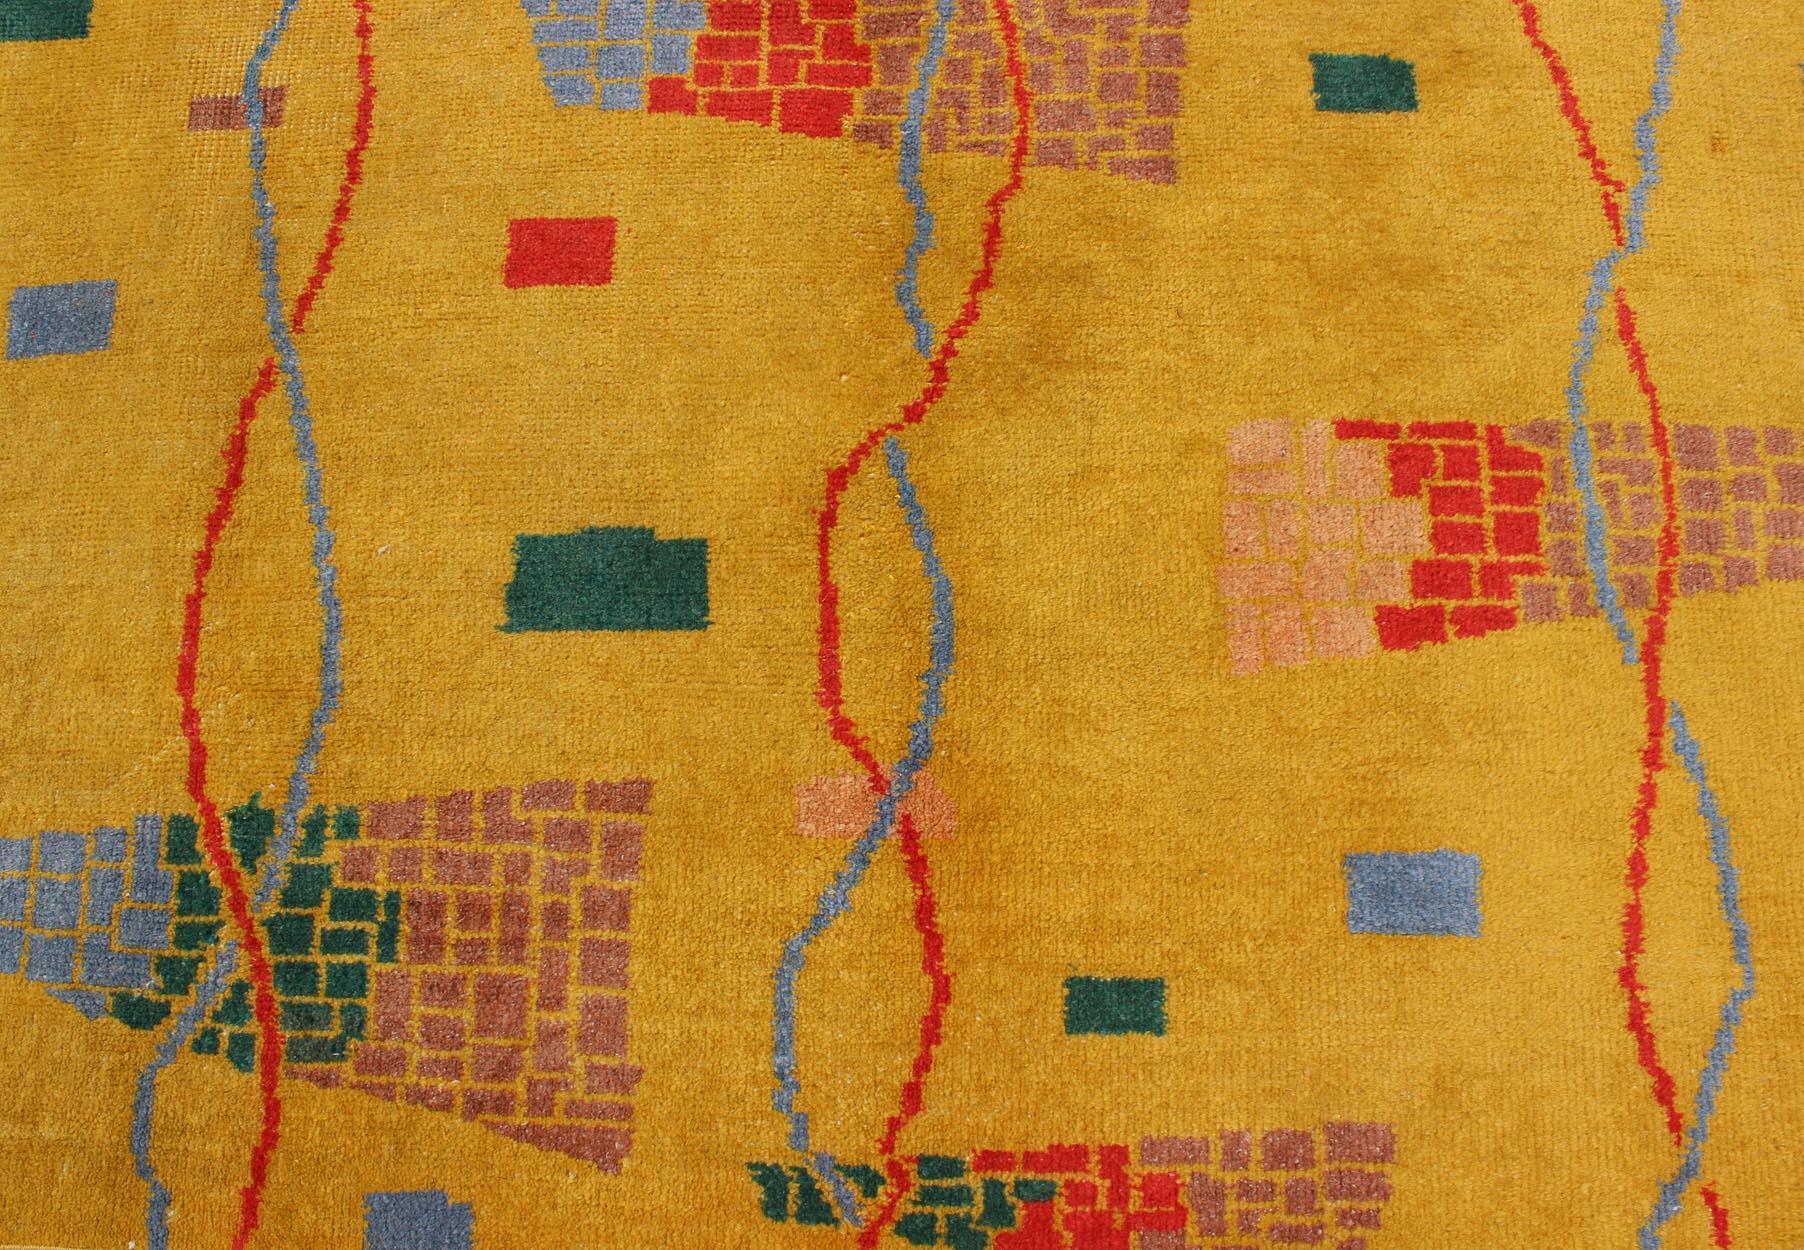 Mid-Century Modern Rug, Turkish Carpet in Bright Yellow, Red, Blue, Green & Pink In Excellent Condition For Sale In Atlanta, GA